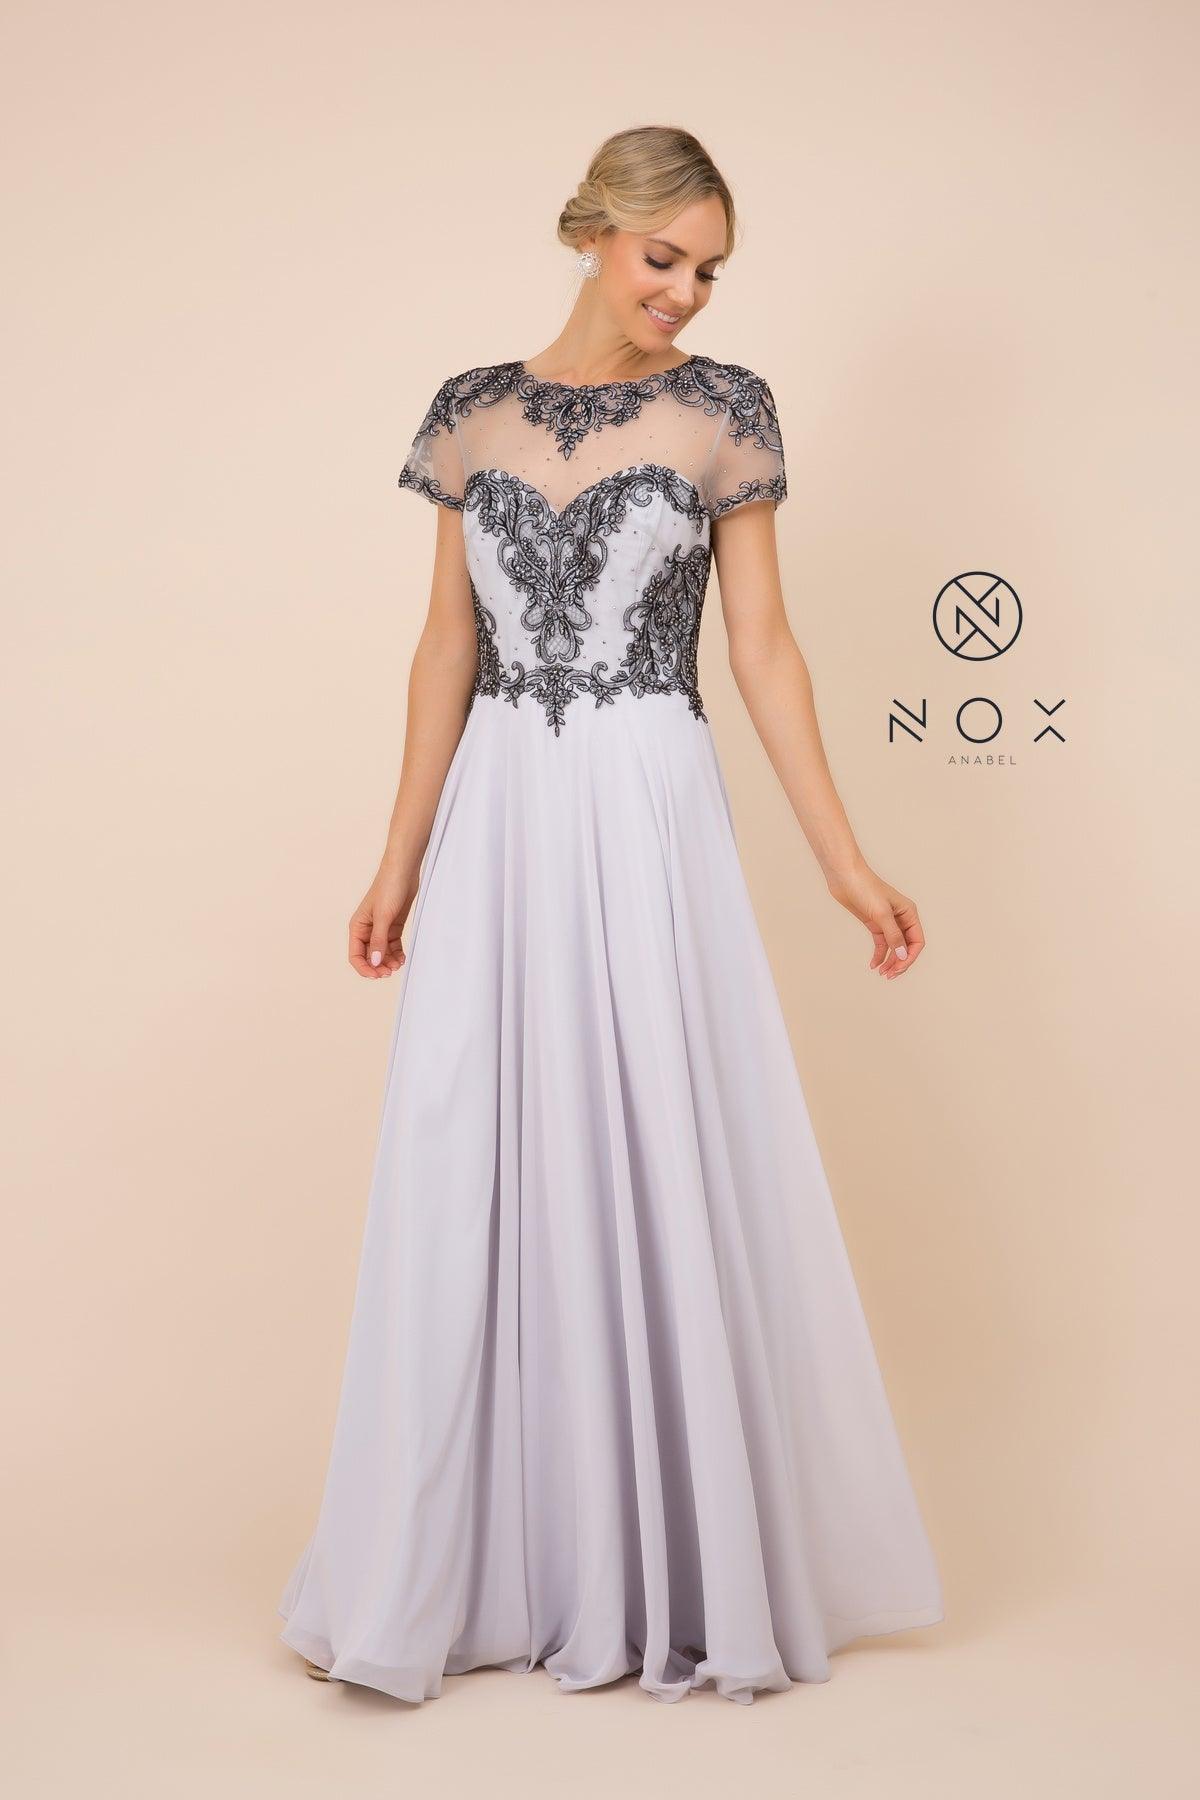 Long Mother of the Bride Short Sleeve Formal Dress - The Dress Outlet Nox Anabel